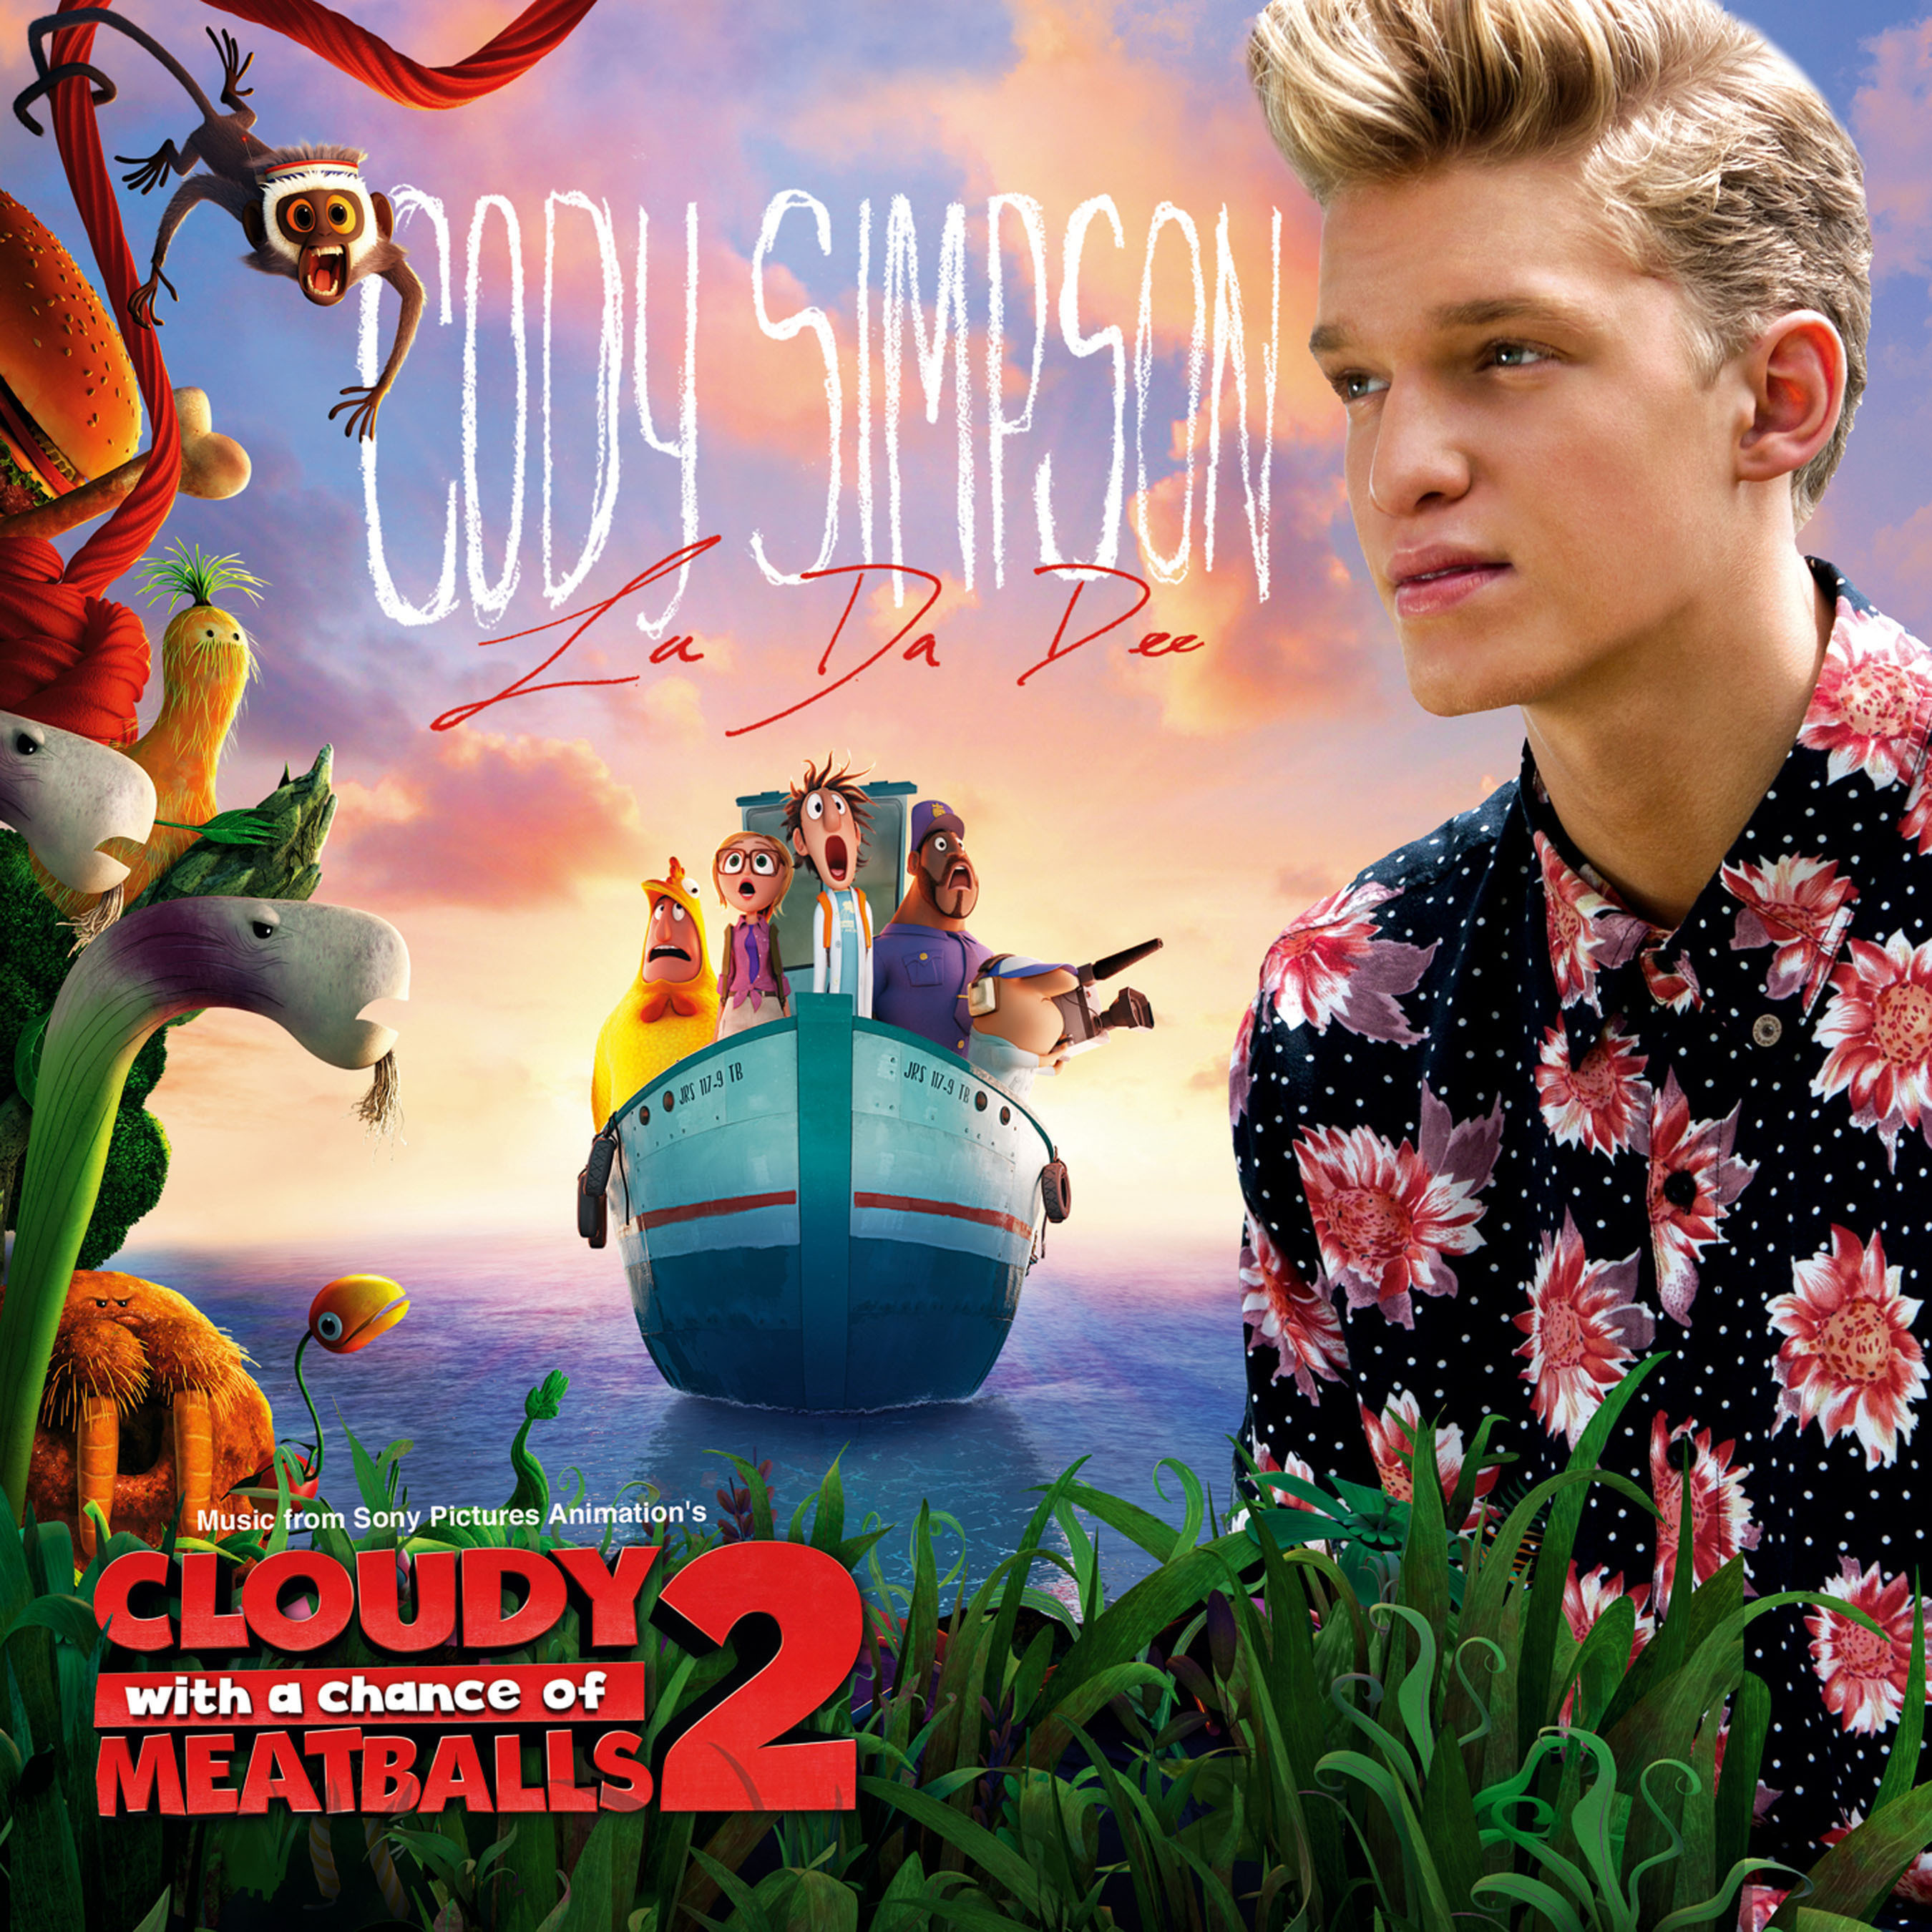 Cody Simpson's "La Da Dee" to become the end credits song for Sony Pictures Animation's "Cloudy with a Chance of Meatballs 2." (PRNewsFoto/Sony Pictures Animation) (PRNewsFoto/)